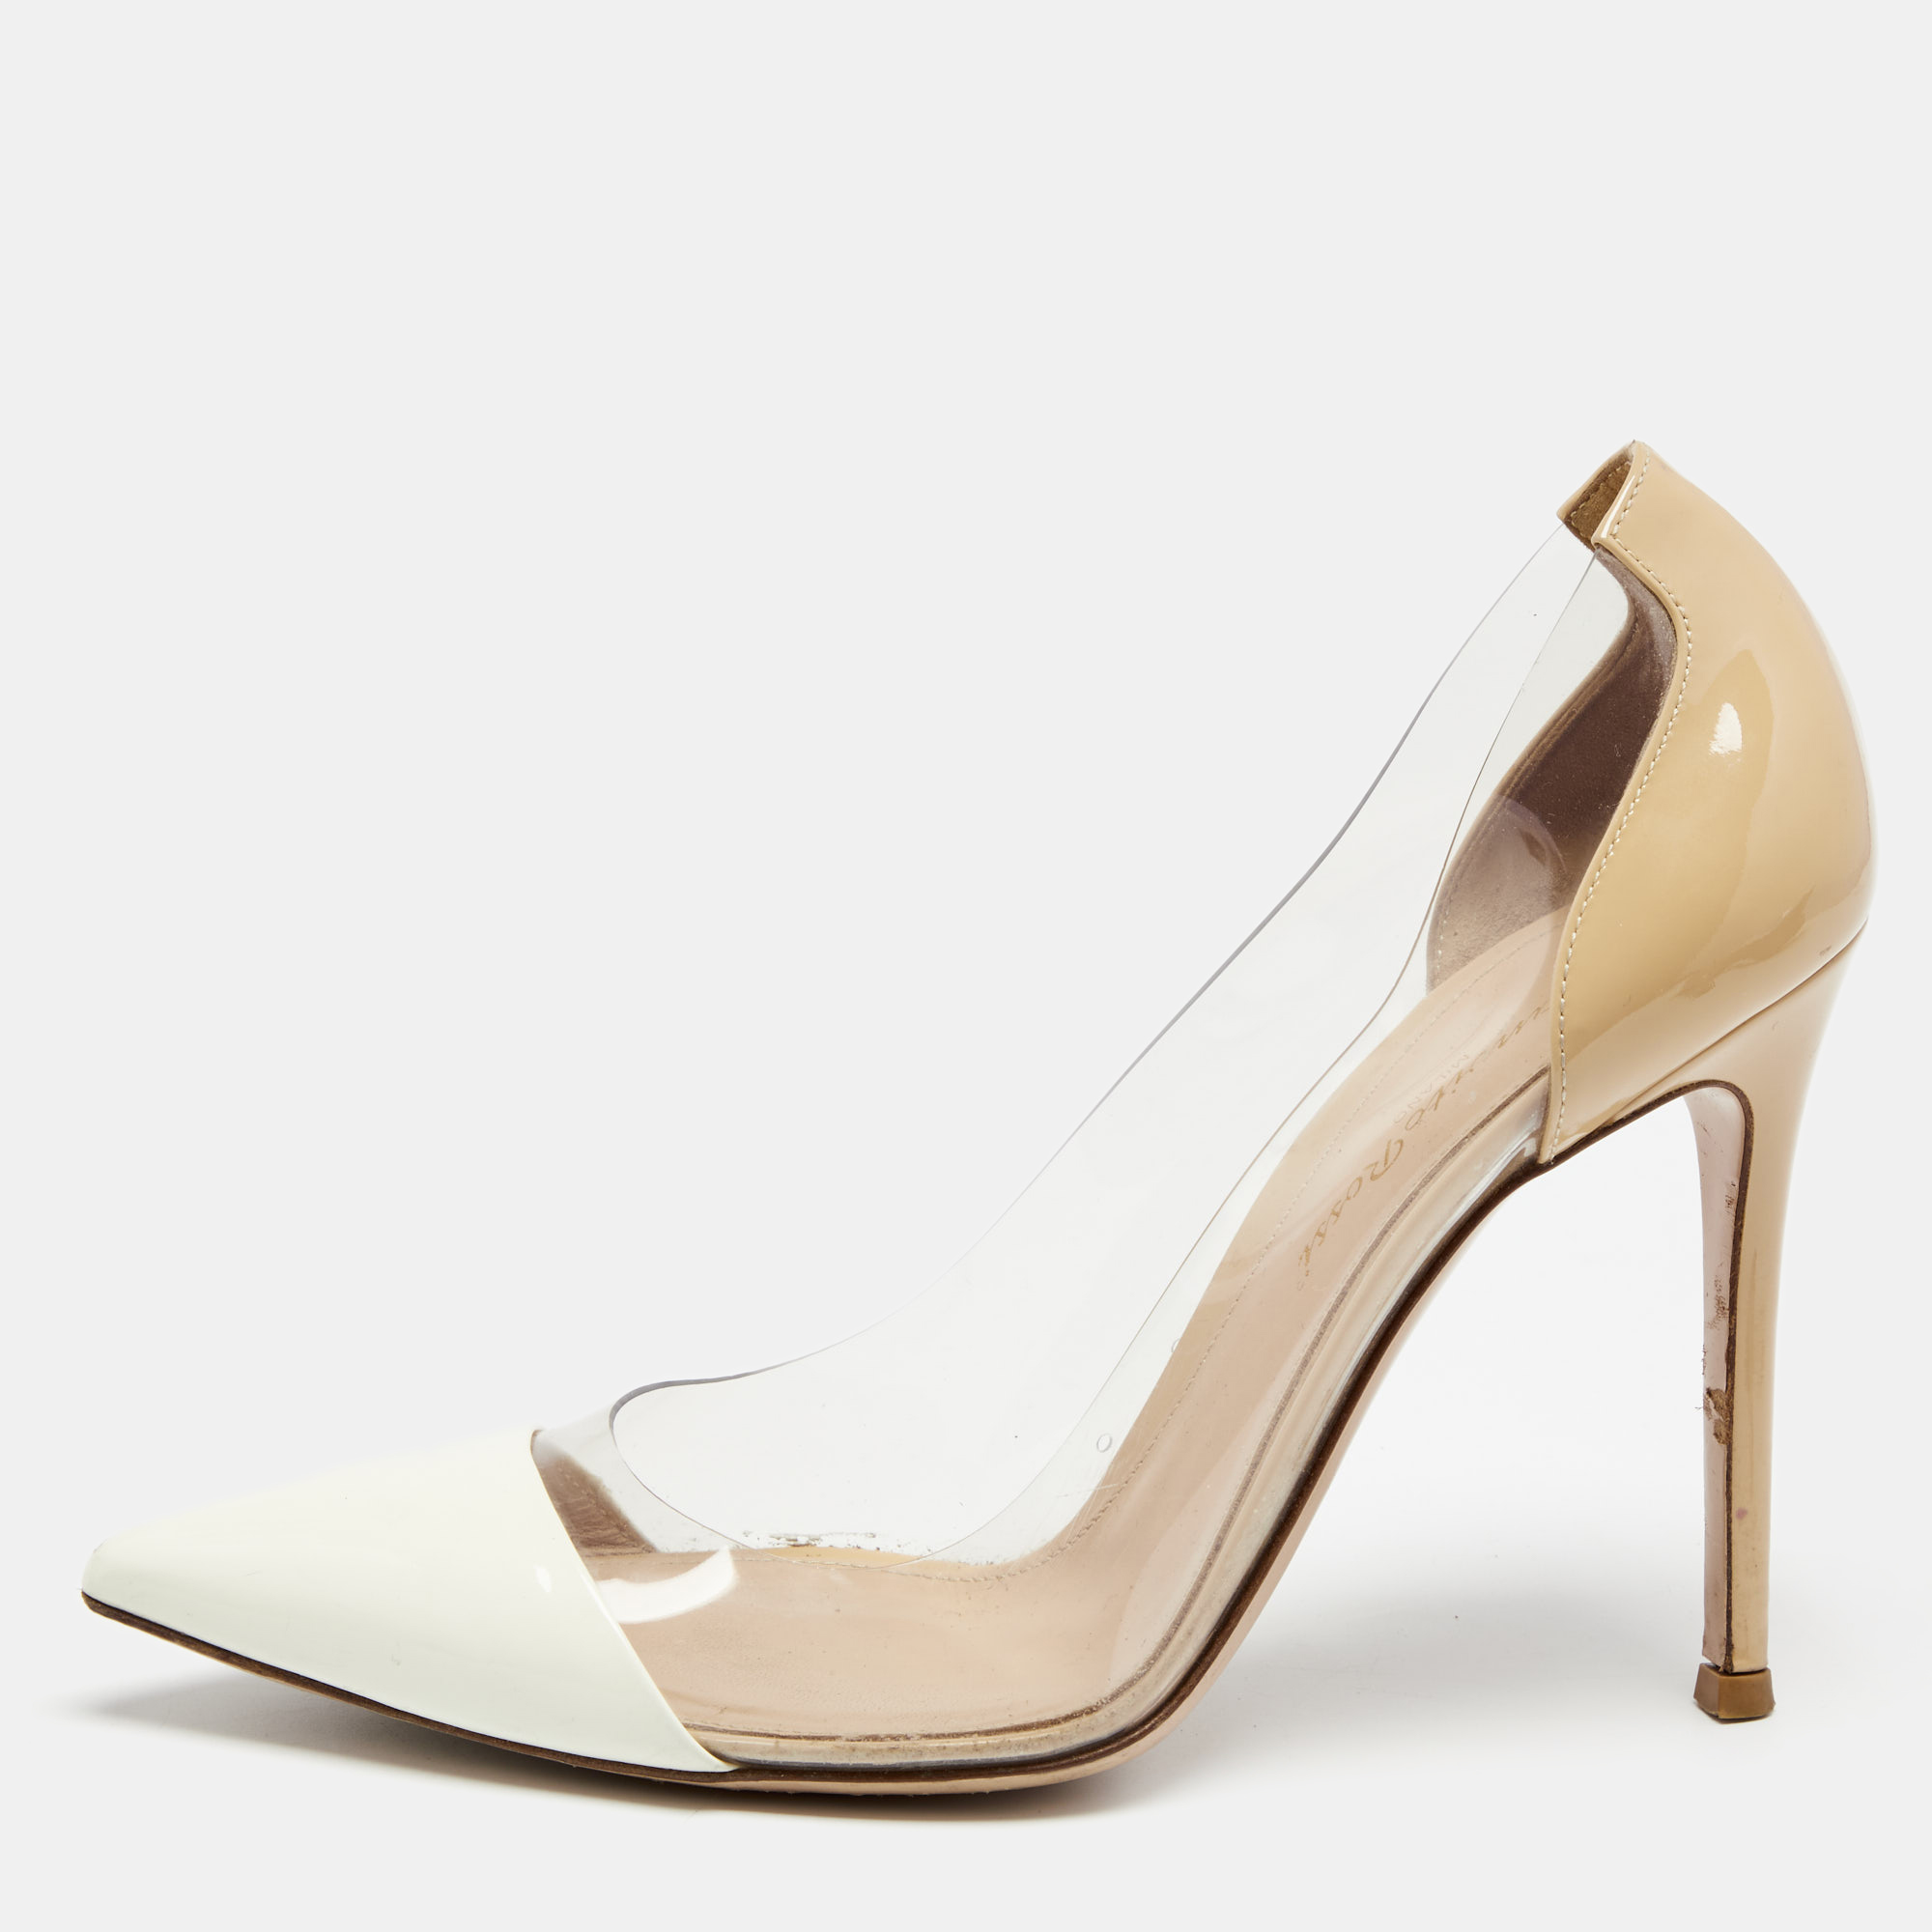 Gianvito rossi beige/white patent leather and pvc plexi pointed toe pumps size 38